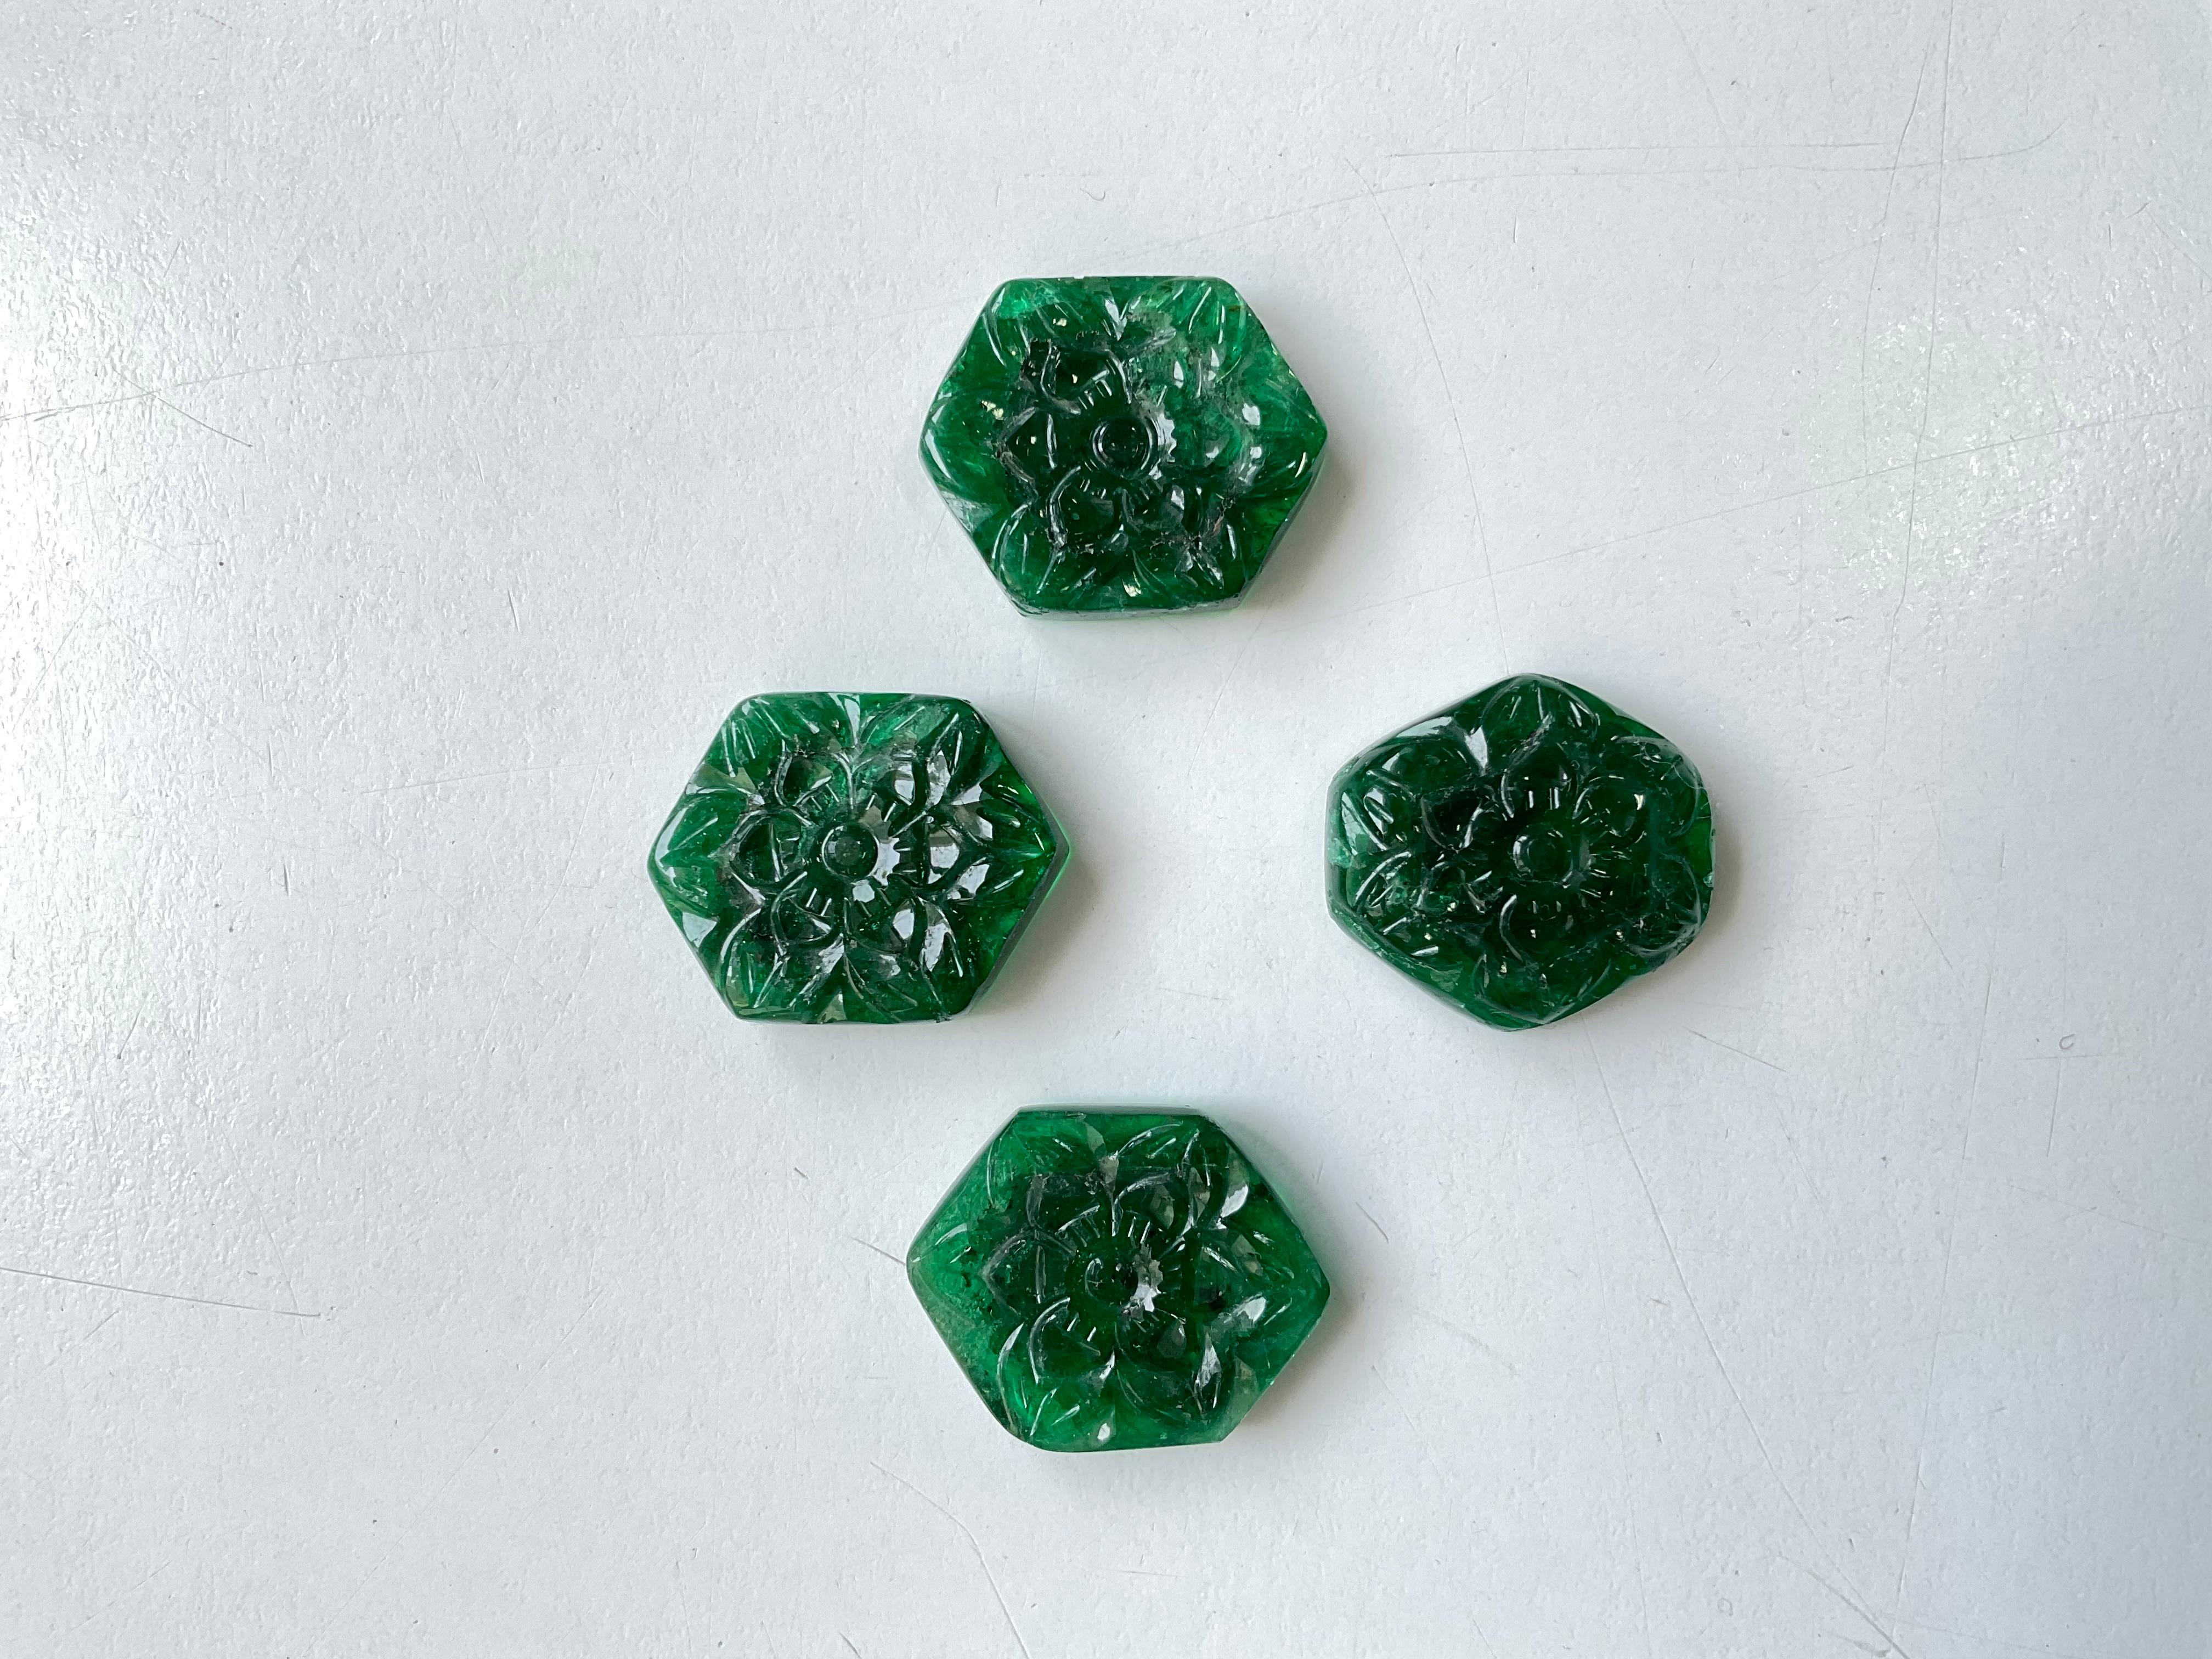 Weight: 77.20 Carats
Size: 20x22 To 23x18 MM
Pieces: 4
Shape: Carved Fancy Hexagon Cabochon
